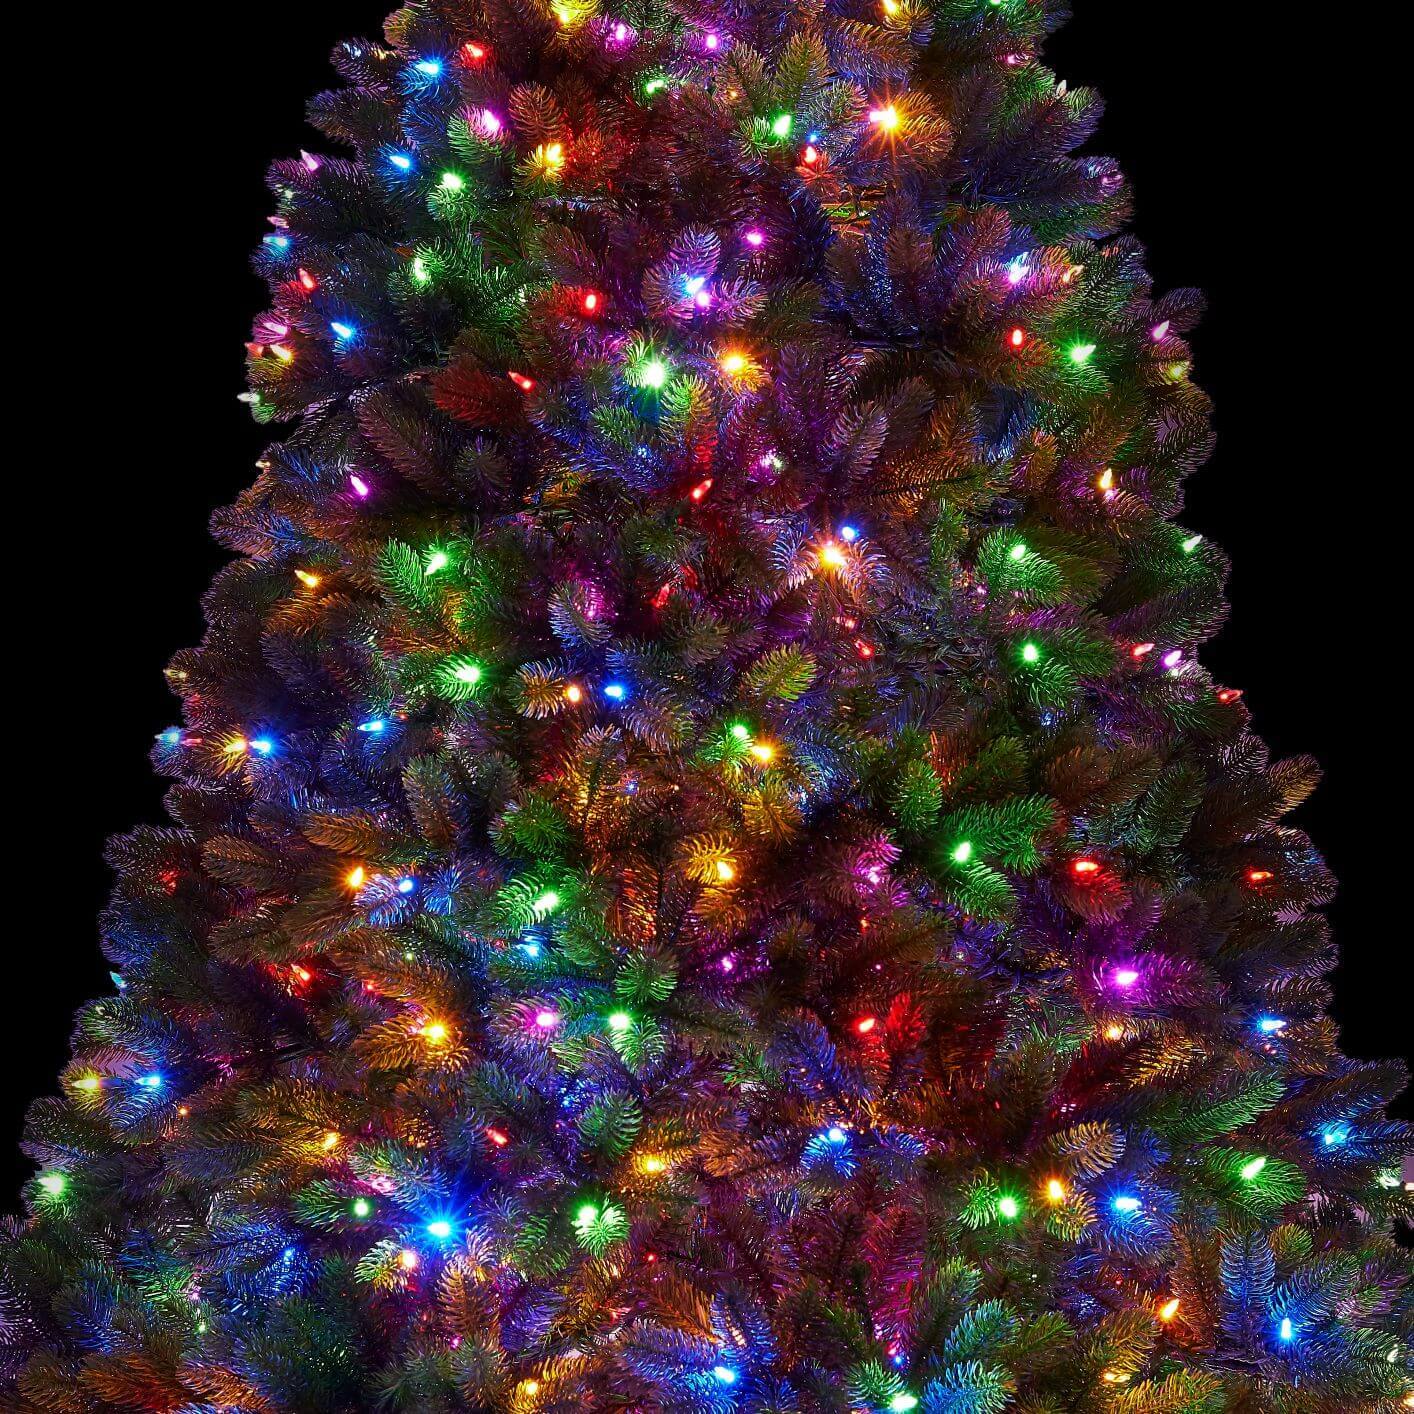 King of Christmas 6.5' Royal Fir Quick-Shape Artificial Christmas Tree with 850 Warm White & Multi-Color LED Lights